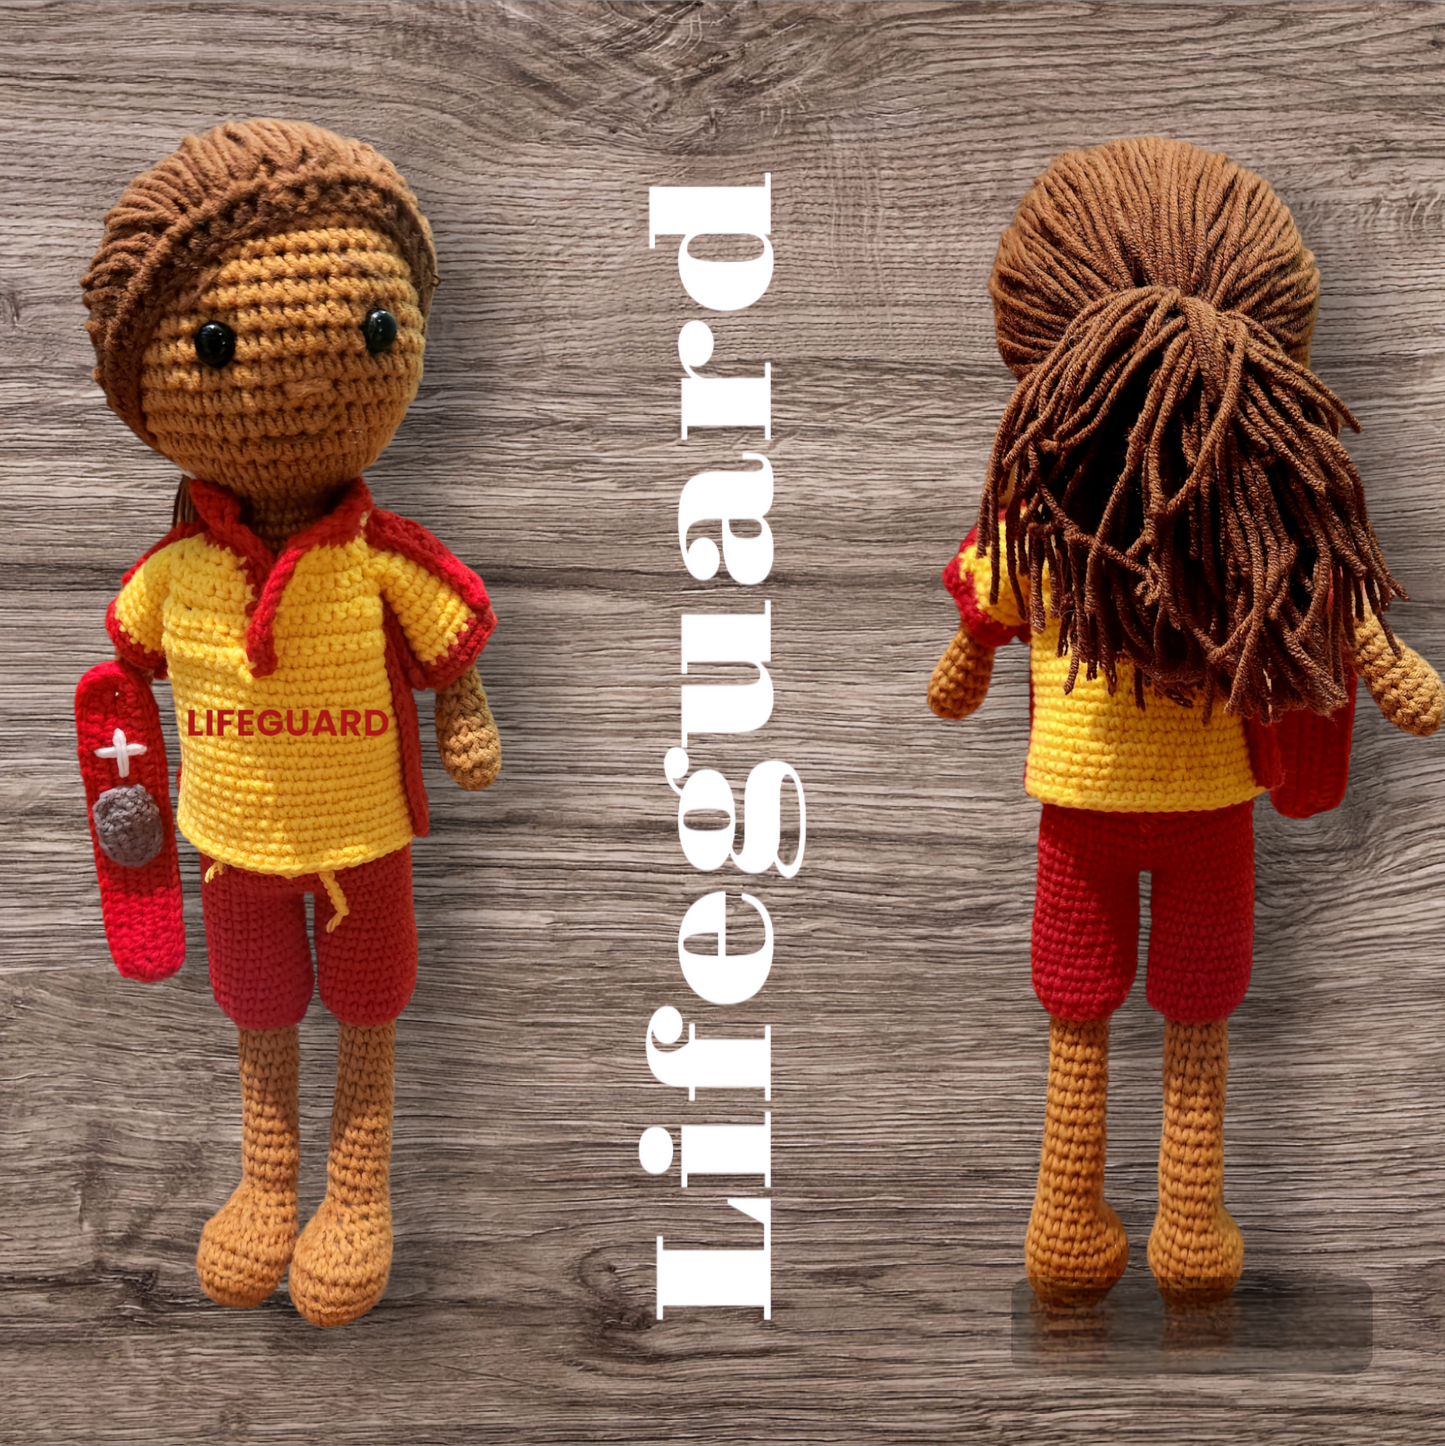 Lifeguard Companions: Personalized, Durable Playmates - Order Now!